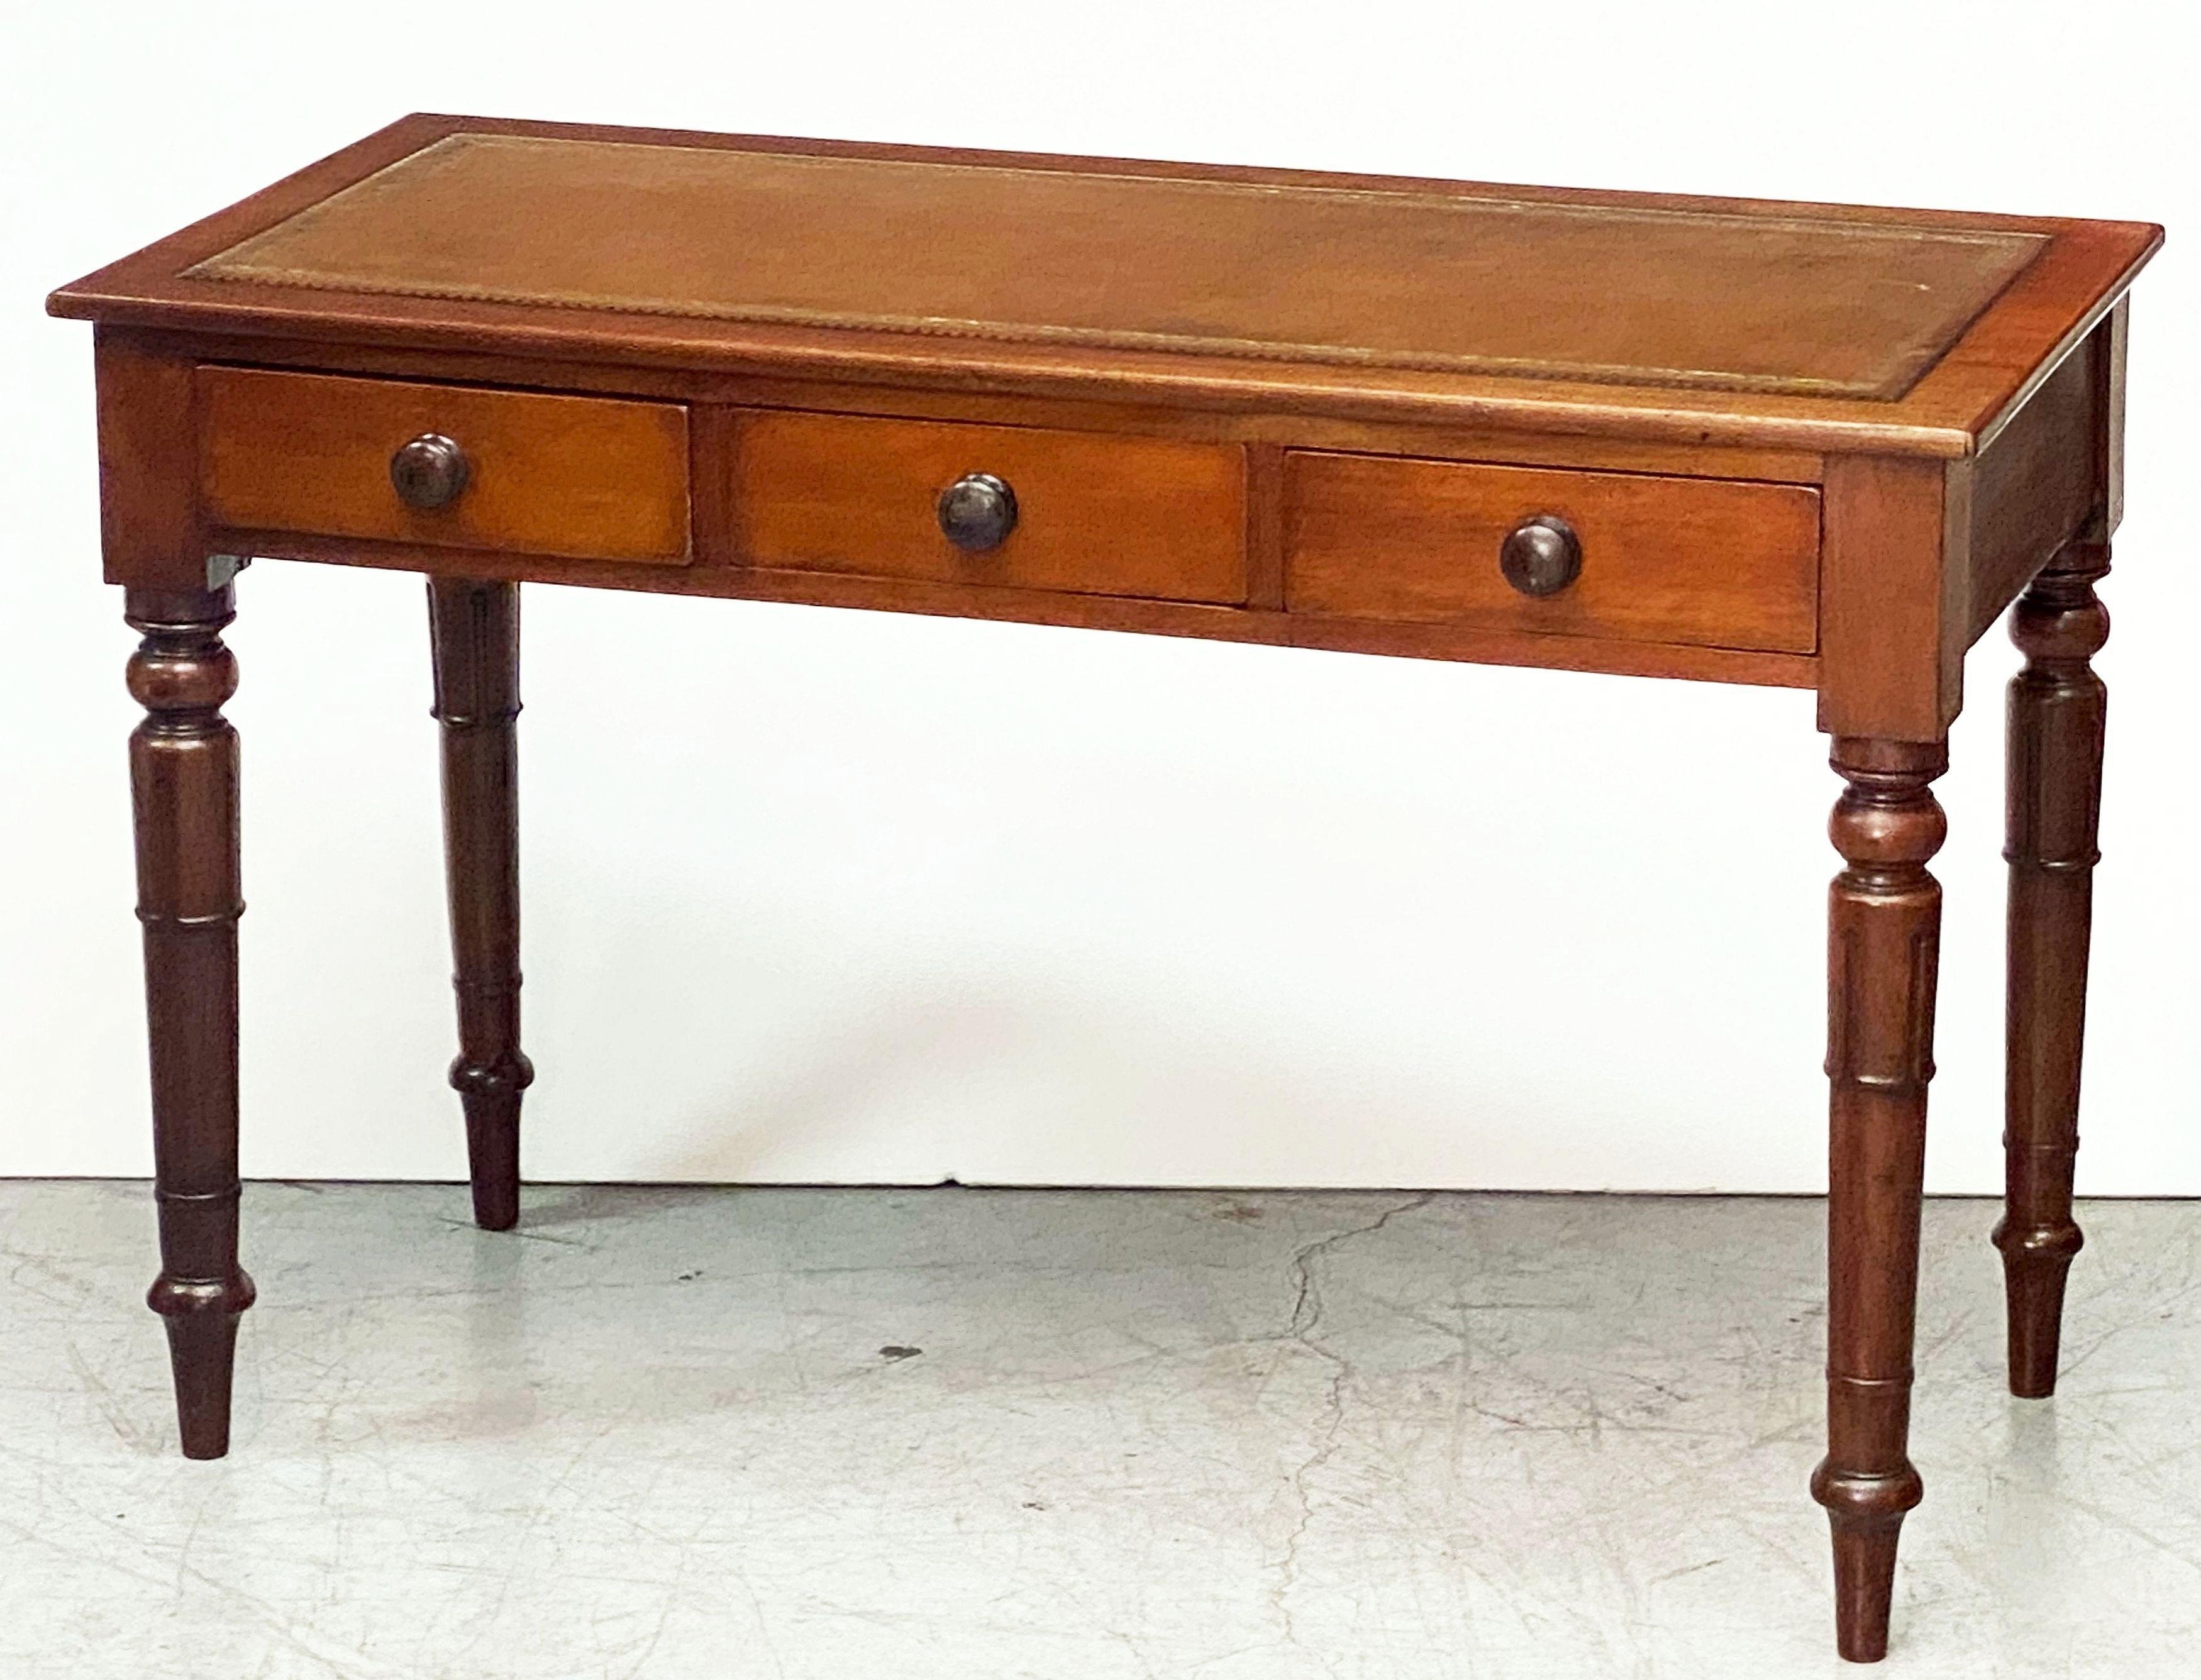 A fine English writing desk or library table of mahogany, from the William IV period, featuring a leather top embossed with gilt edge, over a frieze of three drawers - each with knob pull, resting on handsomely turned legs.

Inside left drawer has